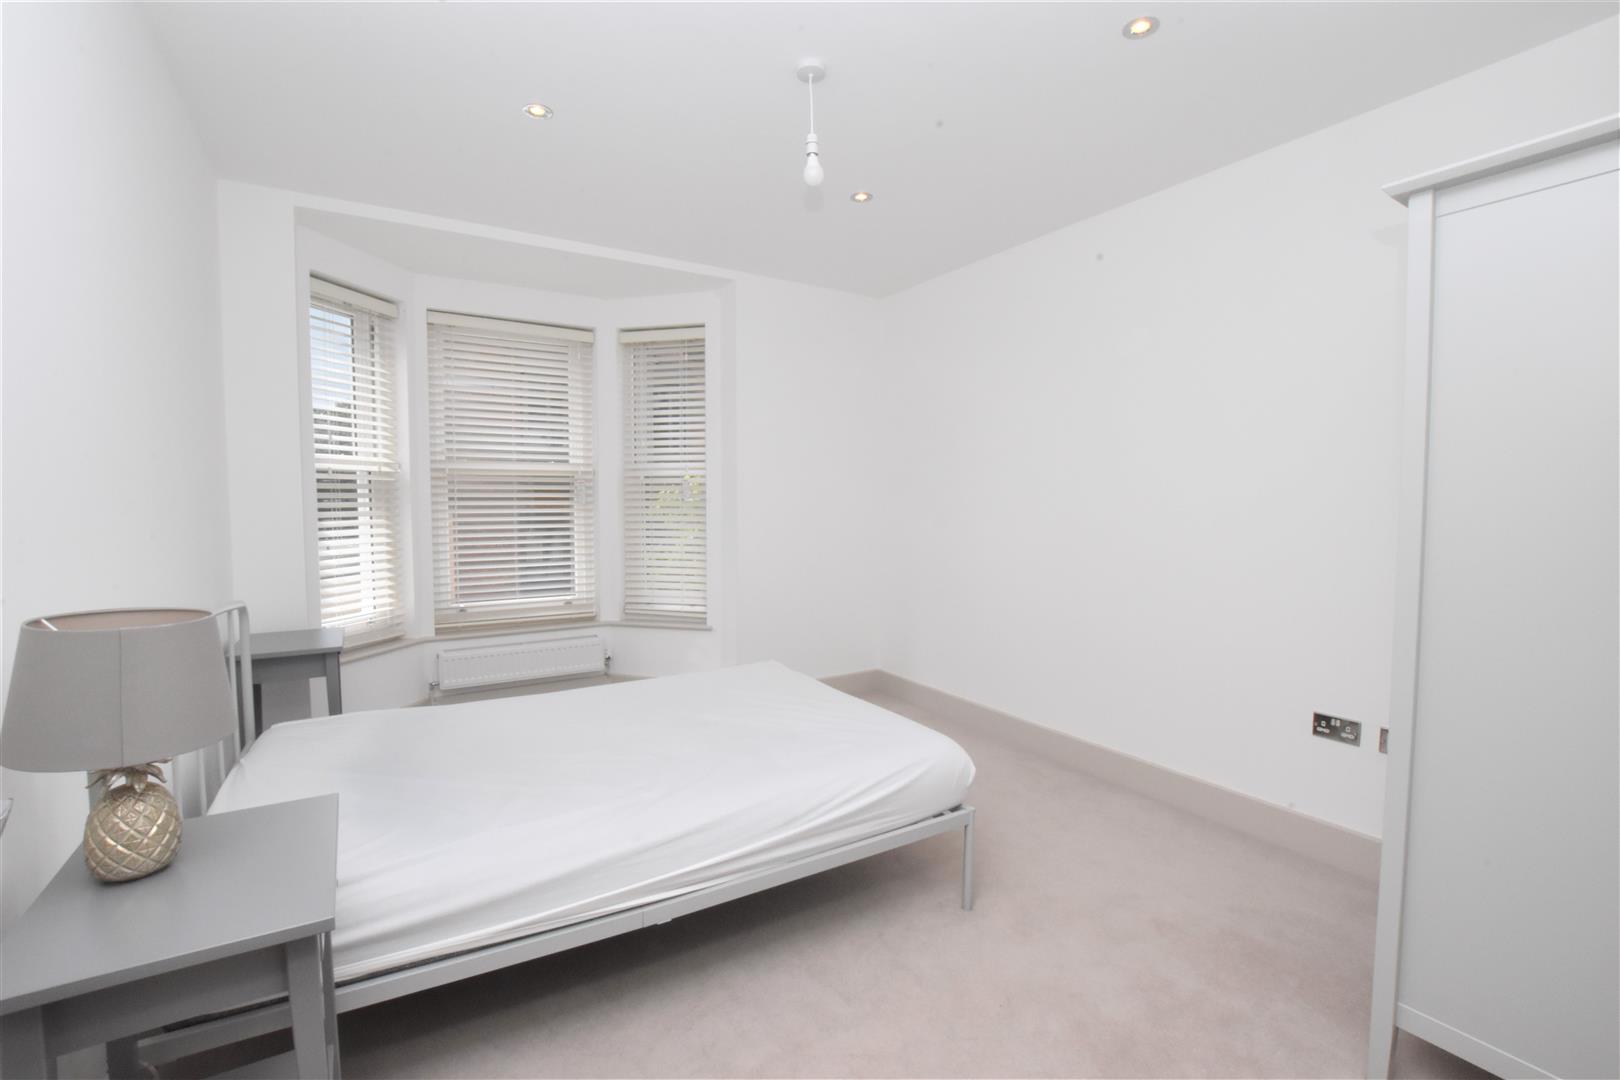 Trinity Place Easton Street Apartment to let in Reading